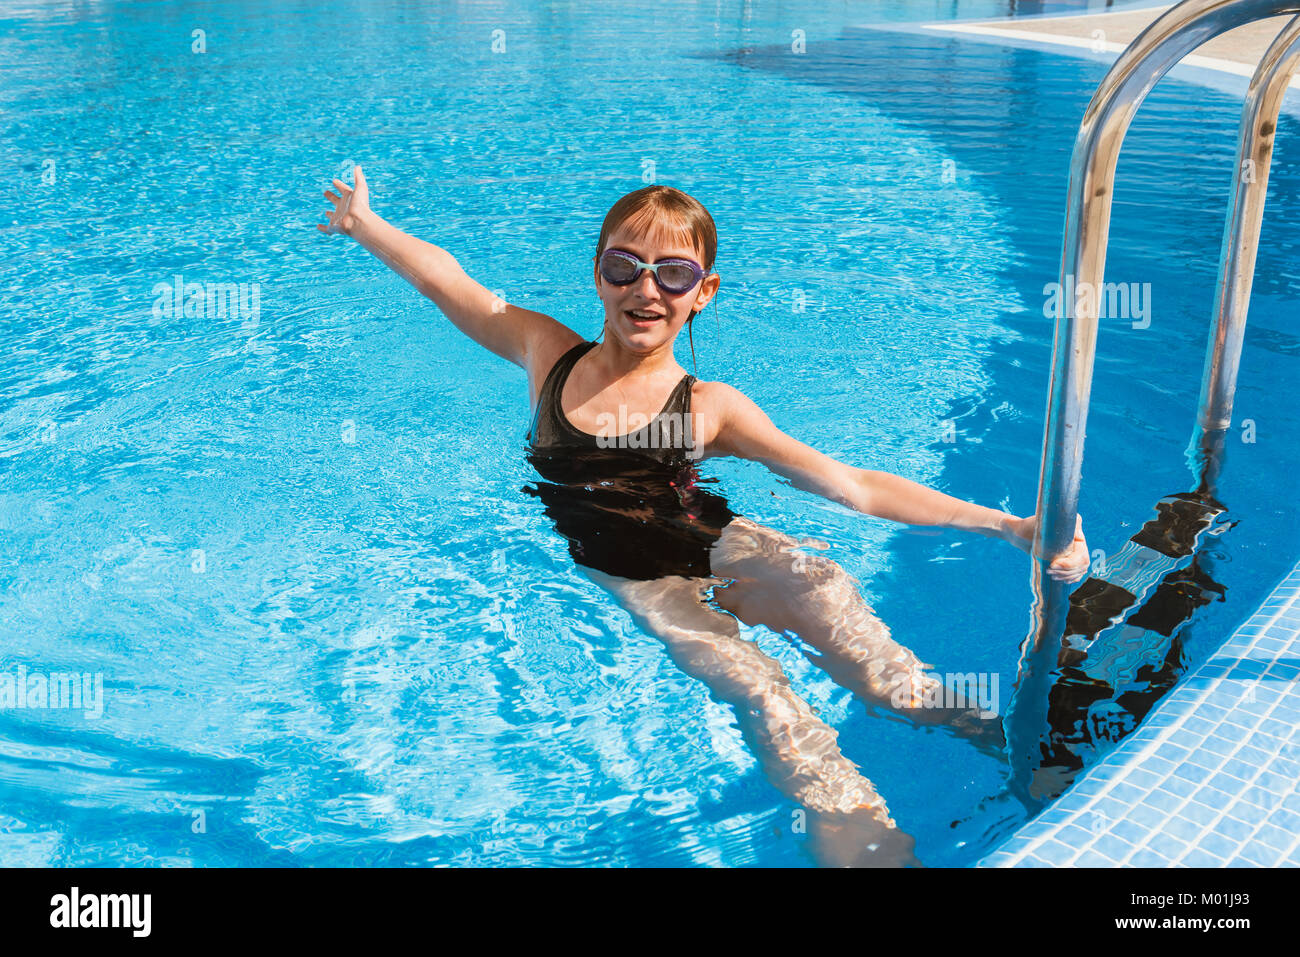 Cute teen girl in swimming pool Banque D'Images